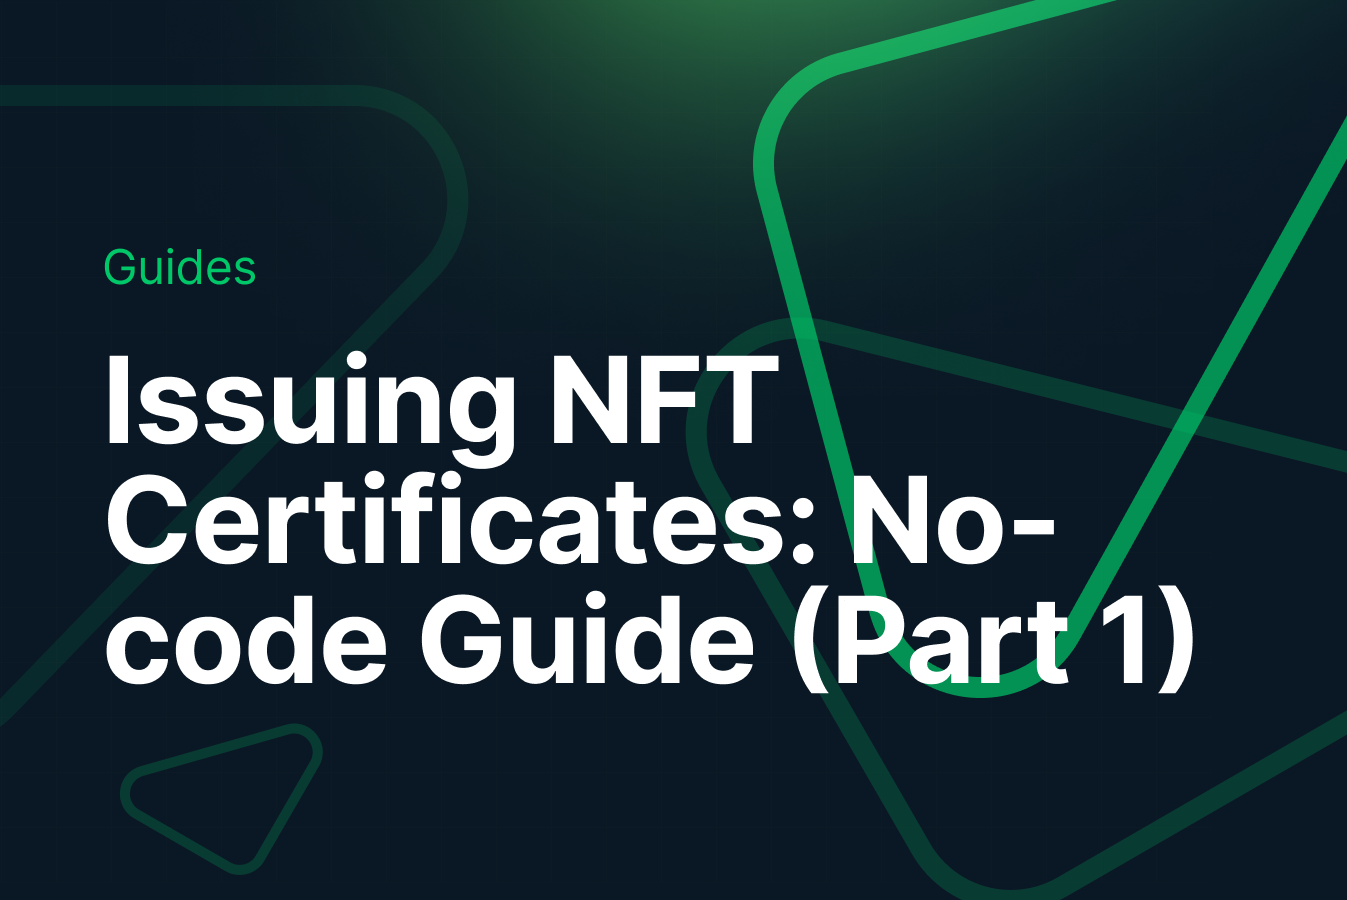 Issuing NFT Certificates for Course Completion: No-Code Guide (Part 1)